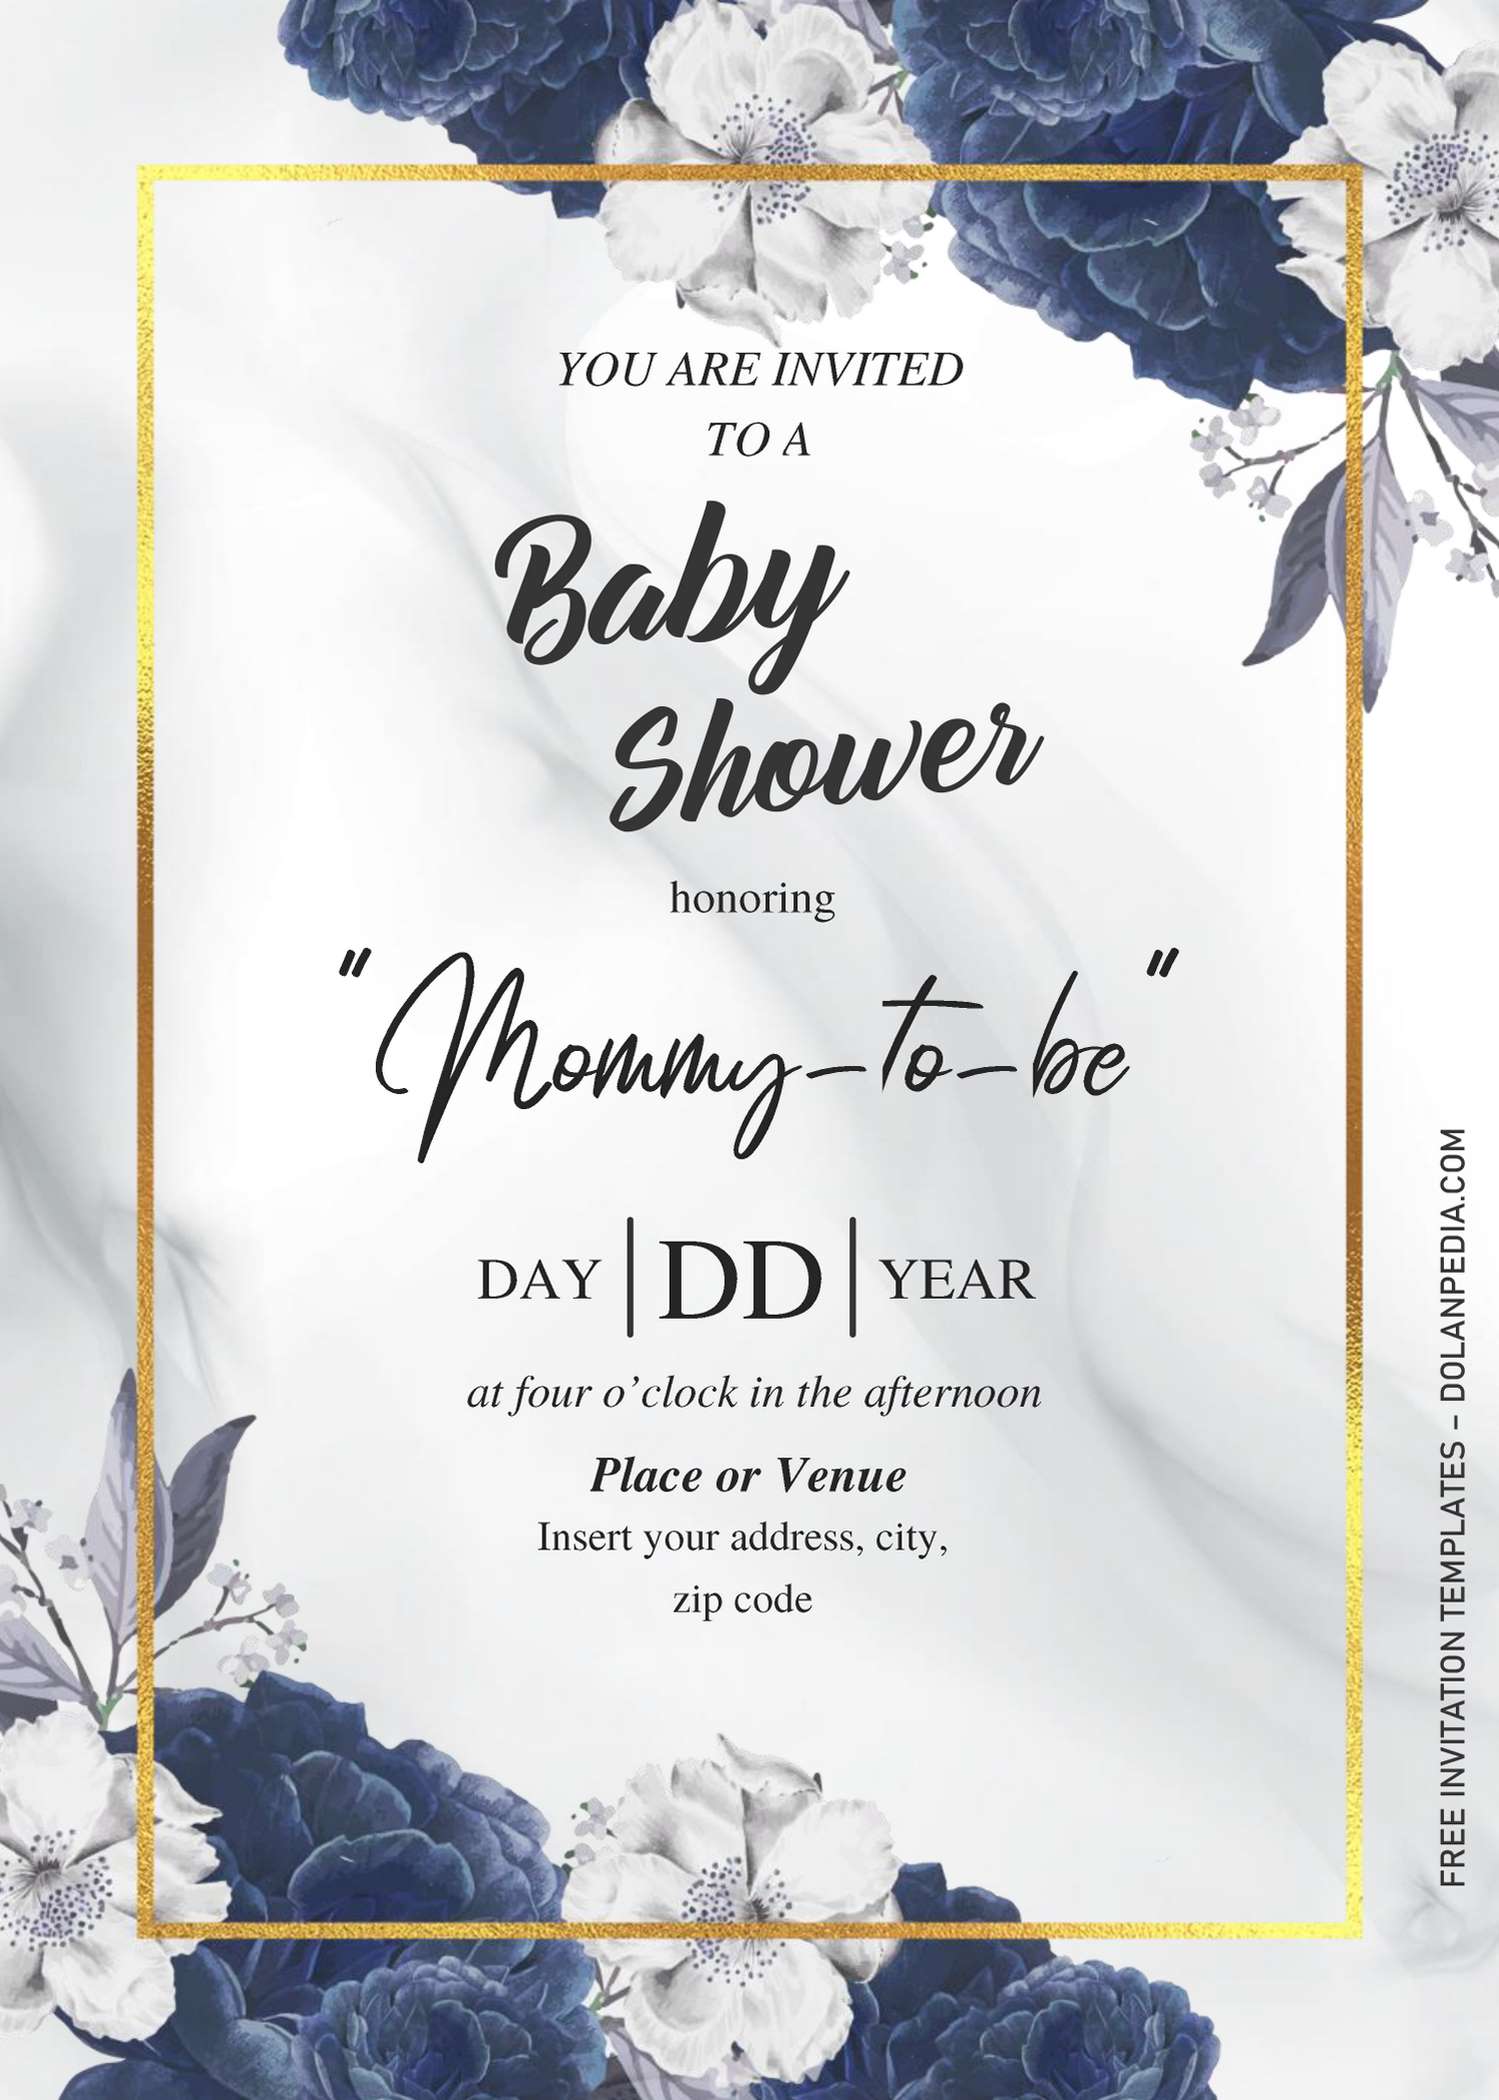 Dusty Blue Rose Baby Shower Invitation Templates – Editable With With Regard To Free Baby Shower Invitation Templates Microsoft Word